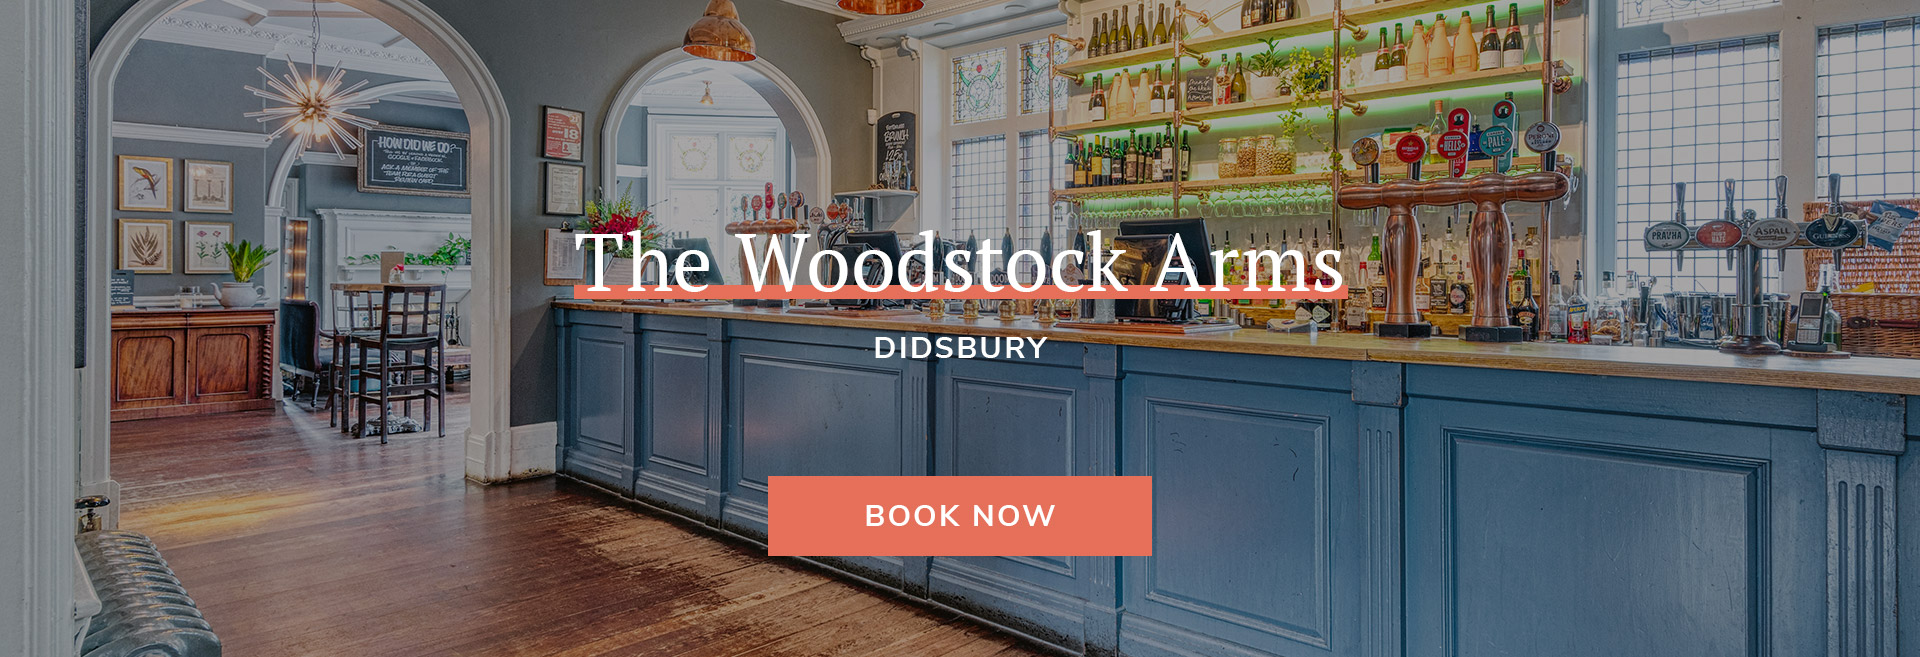 The Woodstock Arms Banner 1